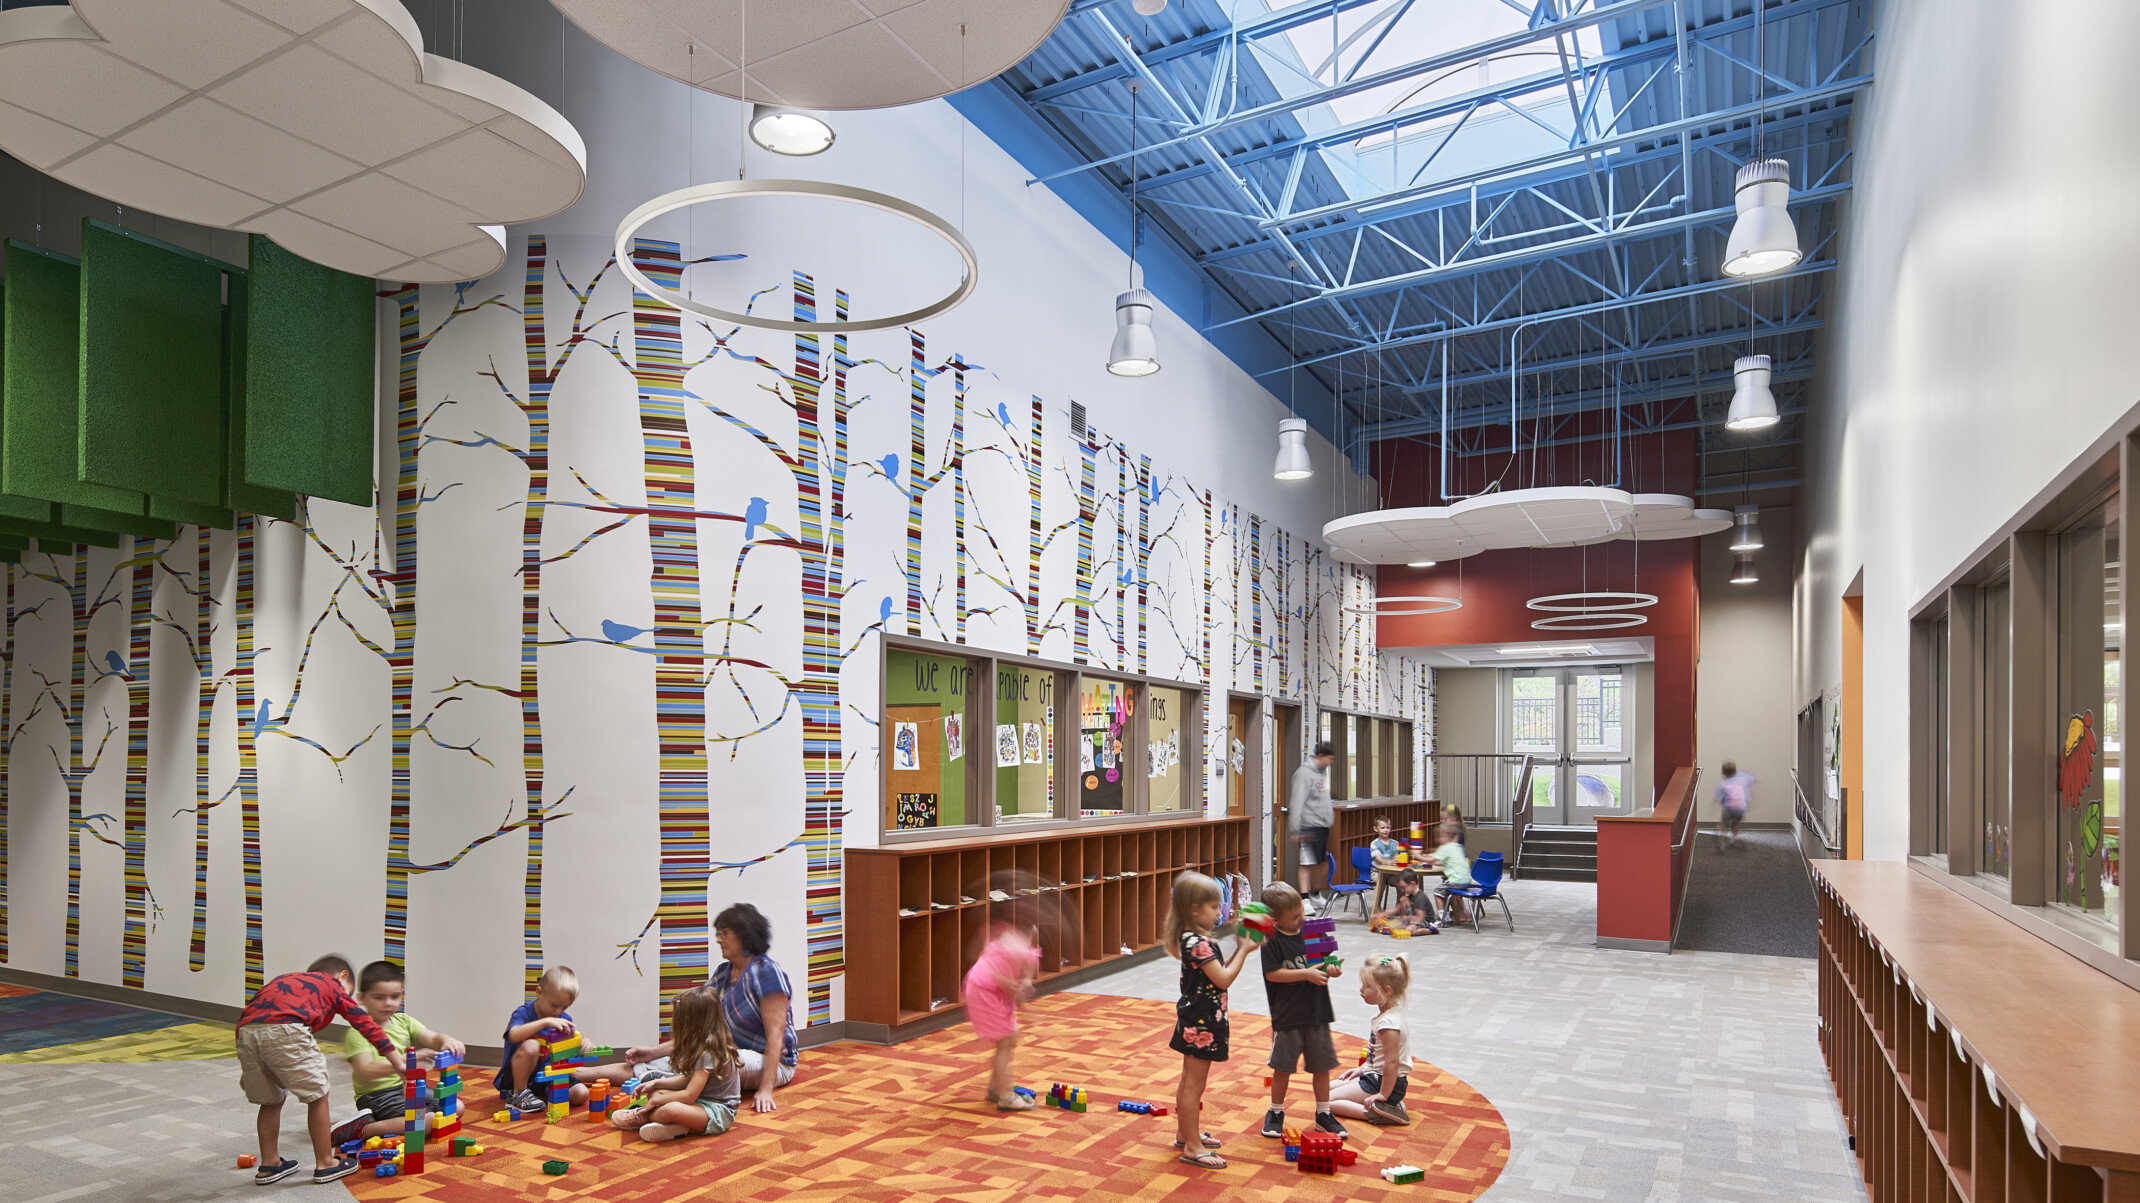 Kearney Early Childhood Education Center learning hallway with striped tree mural and hanging cloud accents under skylight